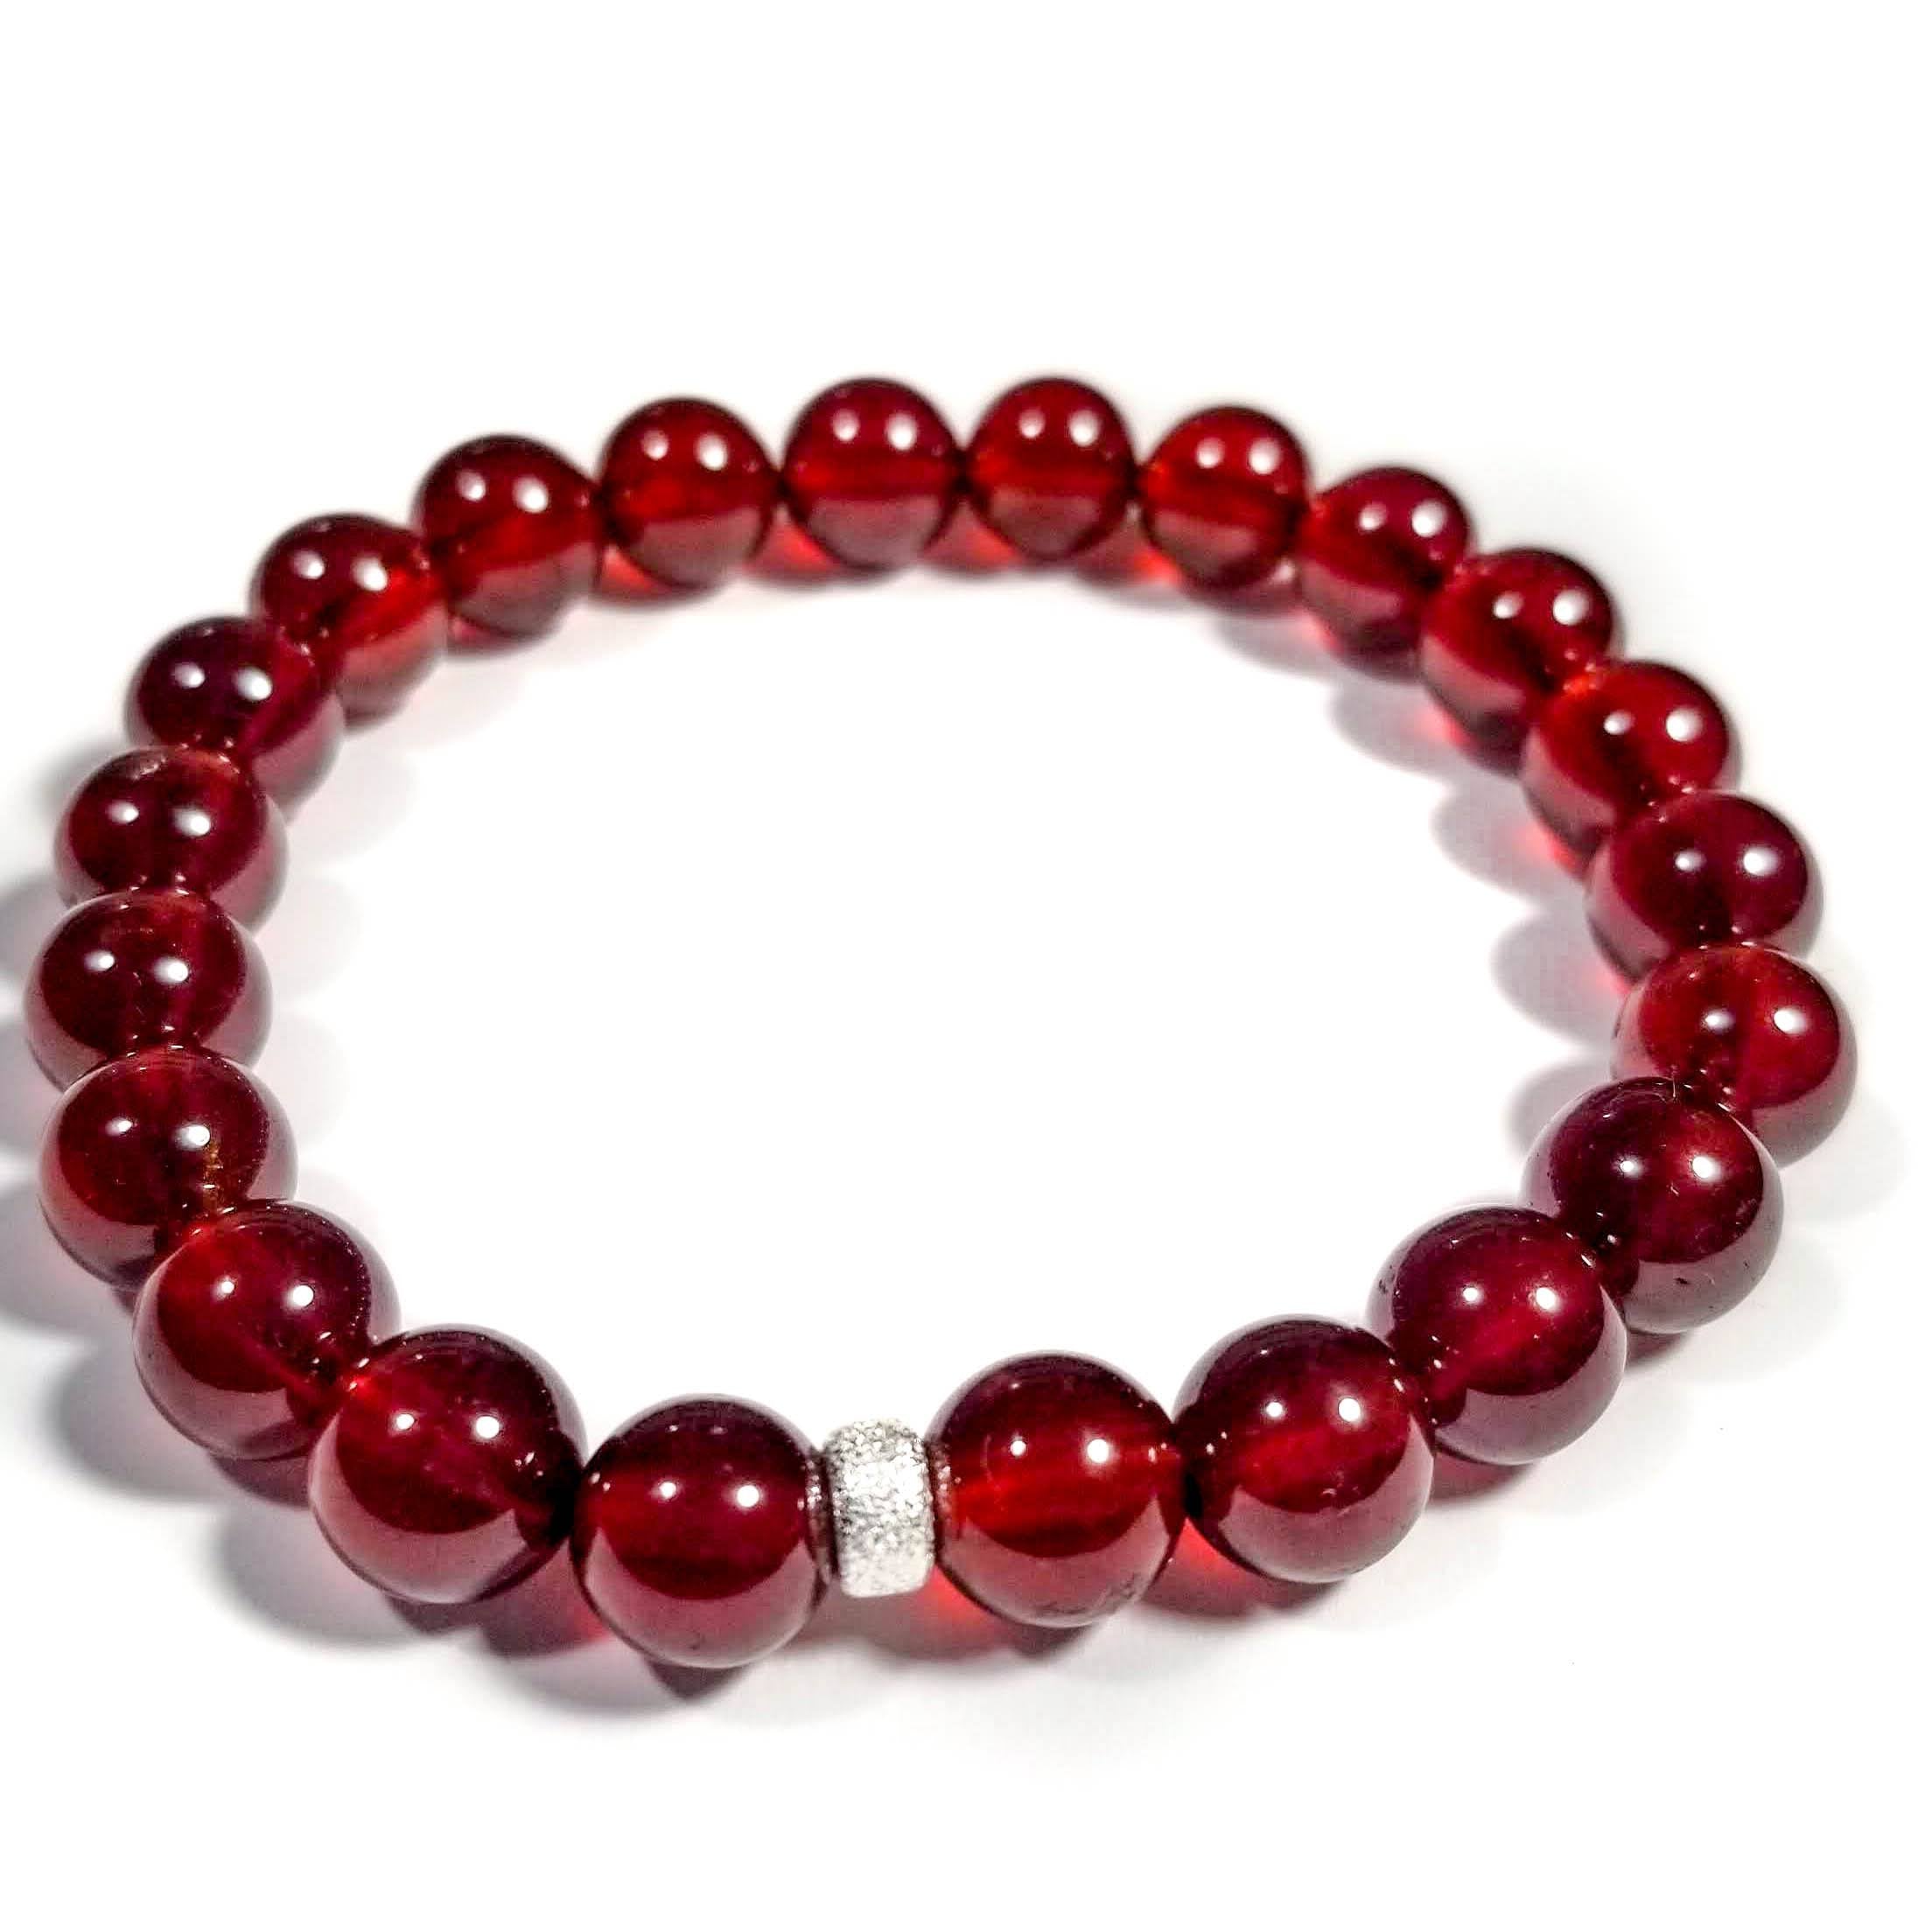 Red Garnet Stones: Properties, Benefits, and Meaning – Mystic Crystal  Imports